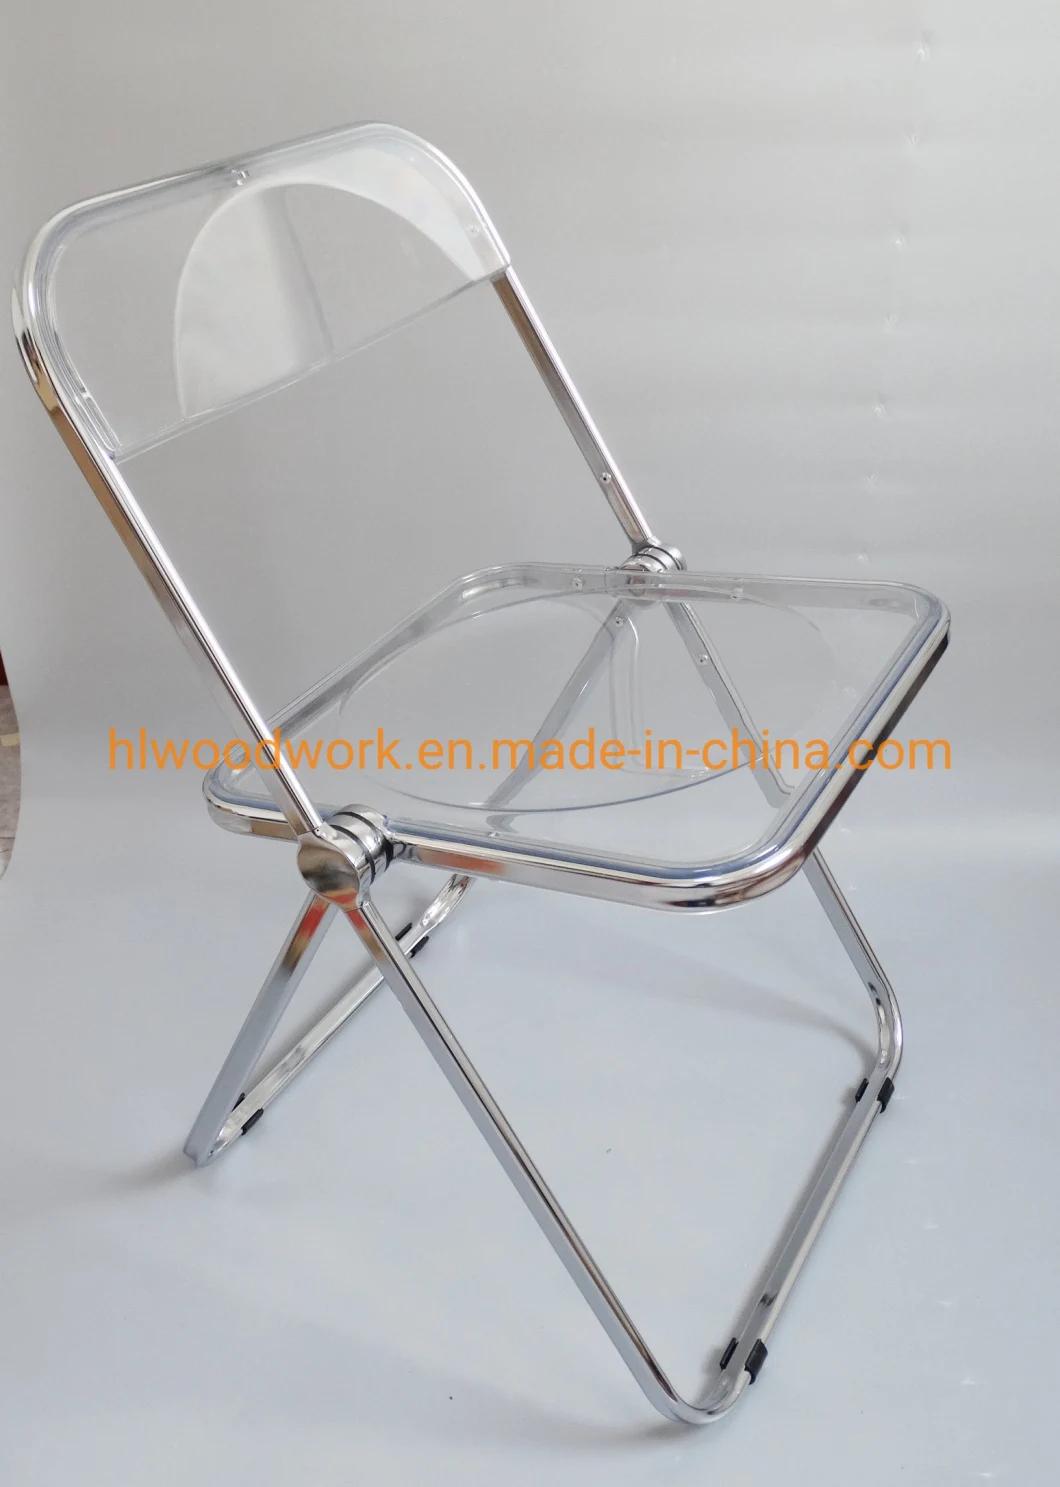 Modern Transparent Brown Folding Chair PC Plastic Dining Room Chair Chrome Frame Office Bar Dining Leisure Banquet Wedding Meeting Chair Plastic Dining Chair